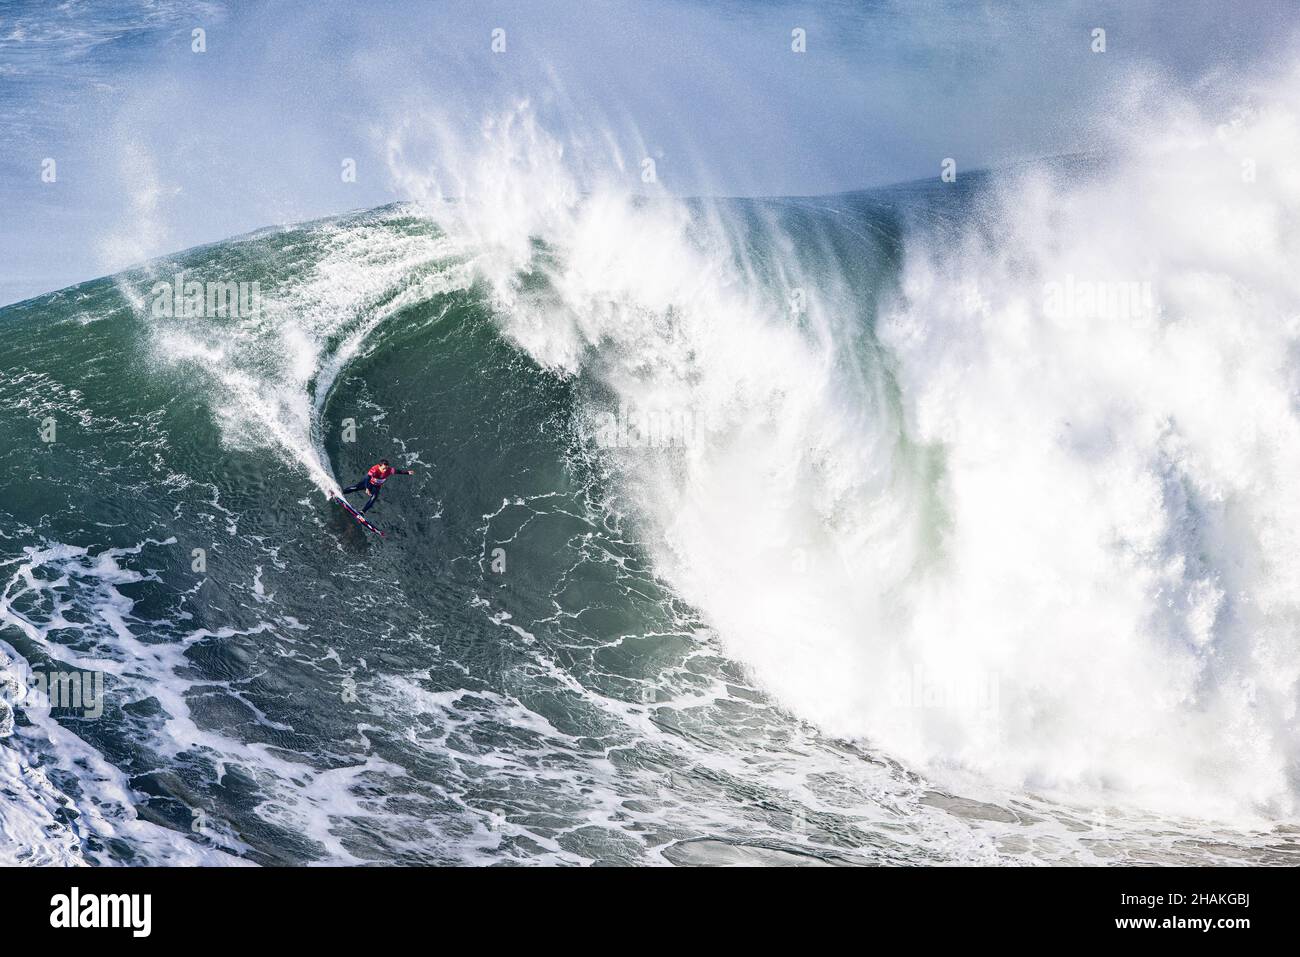 TUDOR NAZARÉ TOW SURFING CHALLENGE PRESENTED BY HURLEY